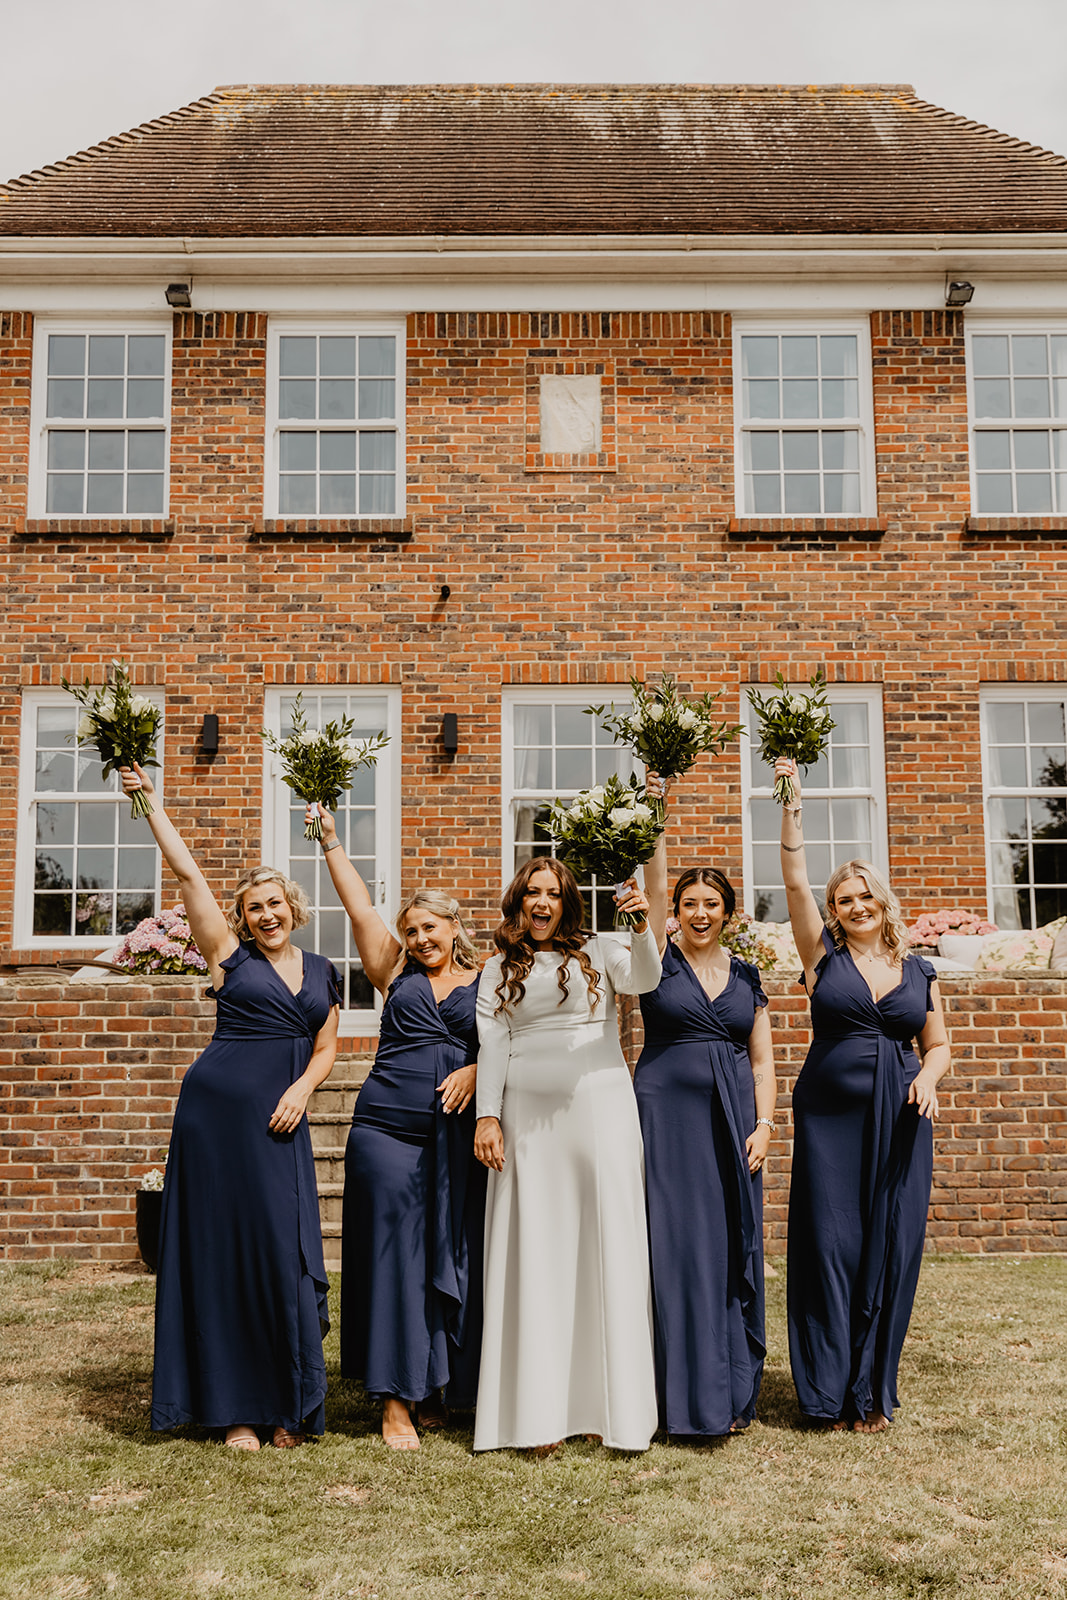 Bride and bridesmaids at a Field Place Manor House Wedding in Worthing, Sussex. By Olive Joy Photography